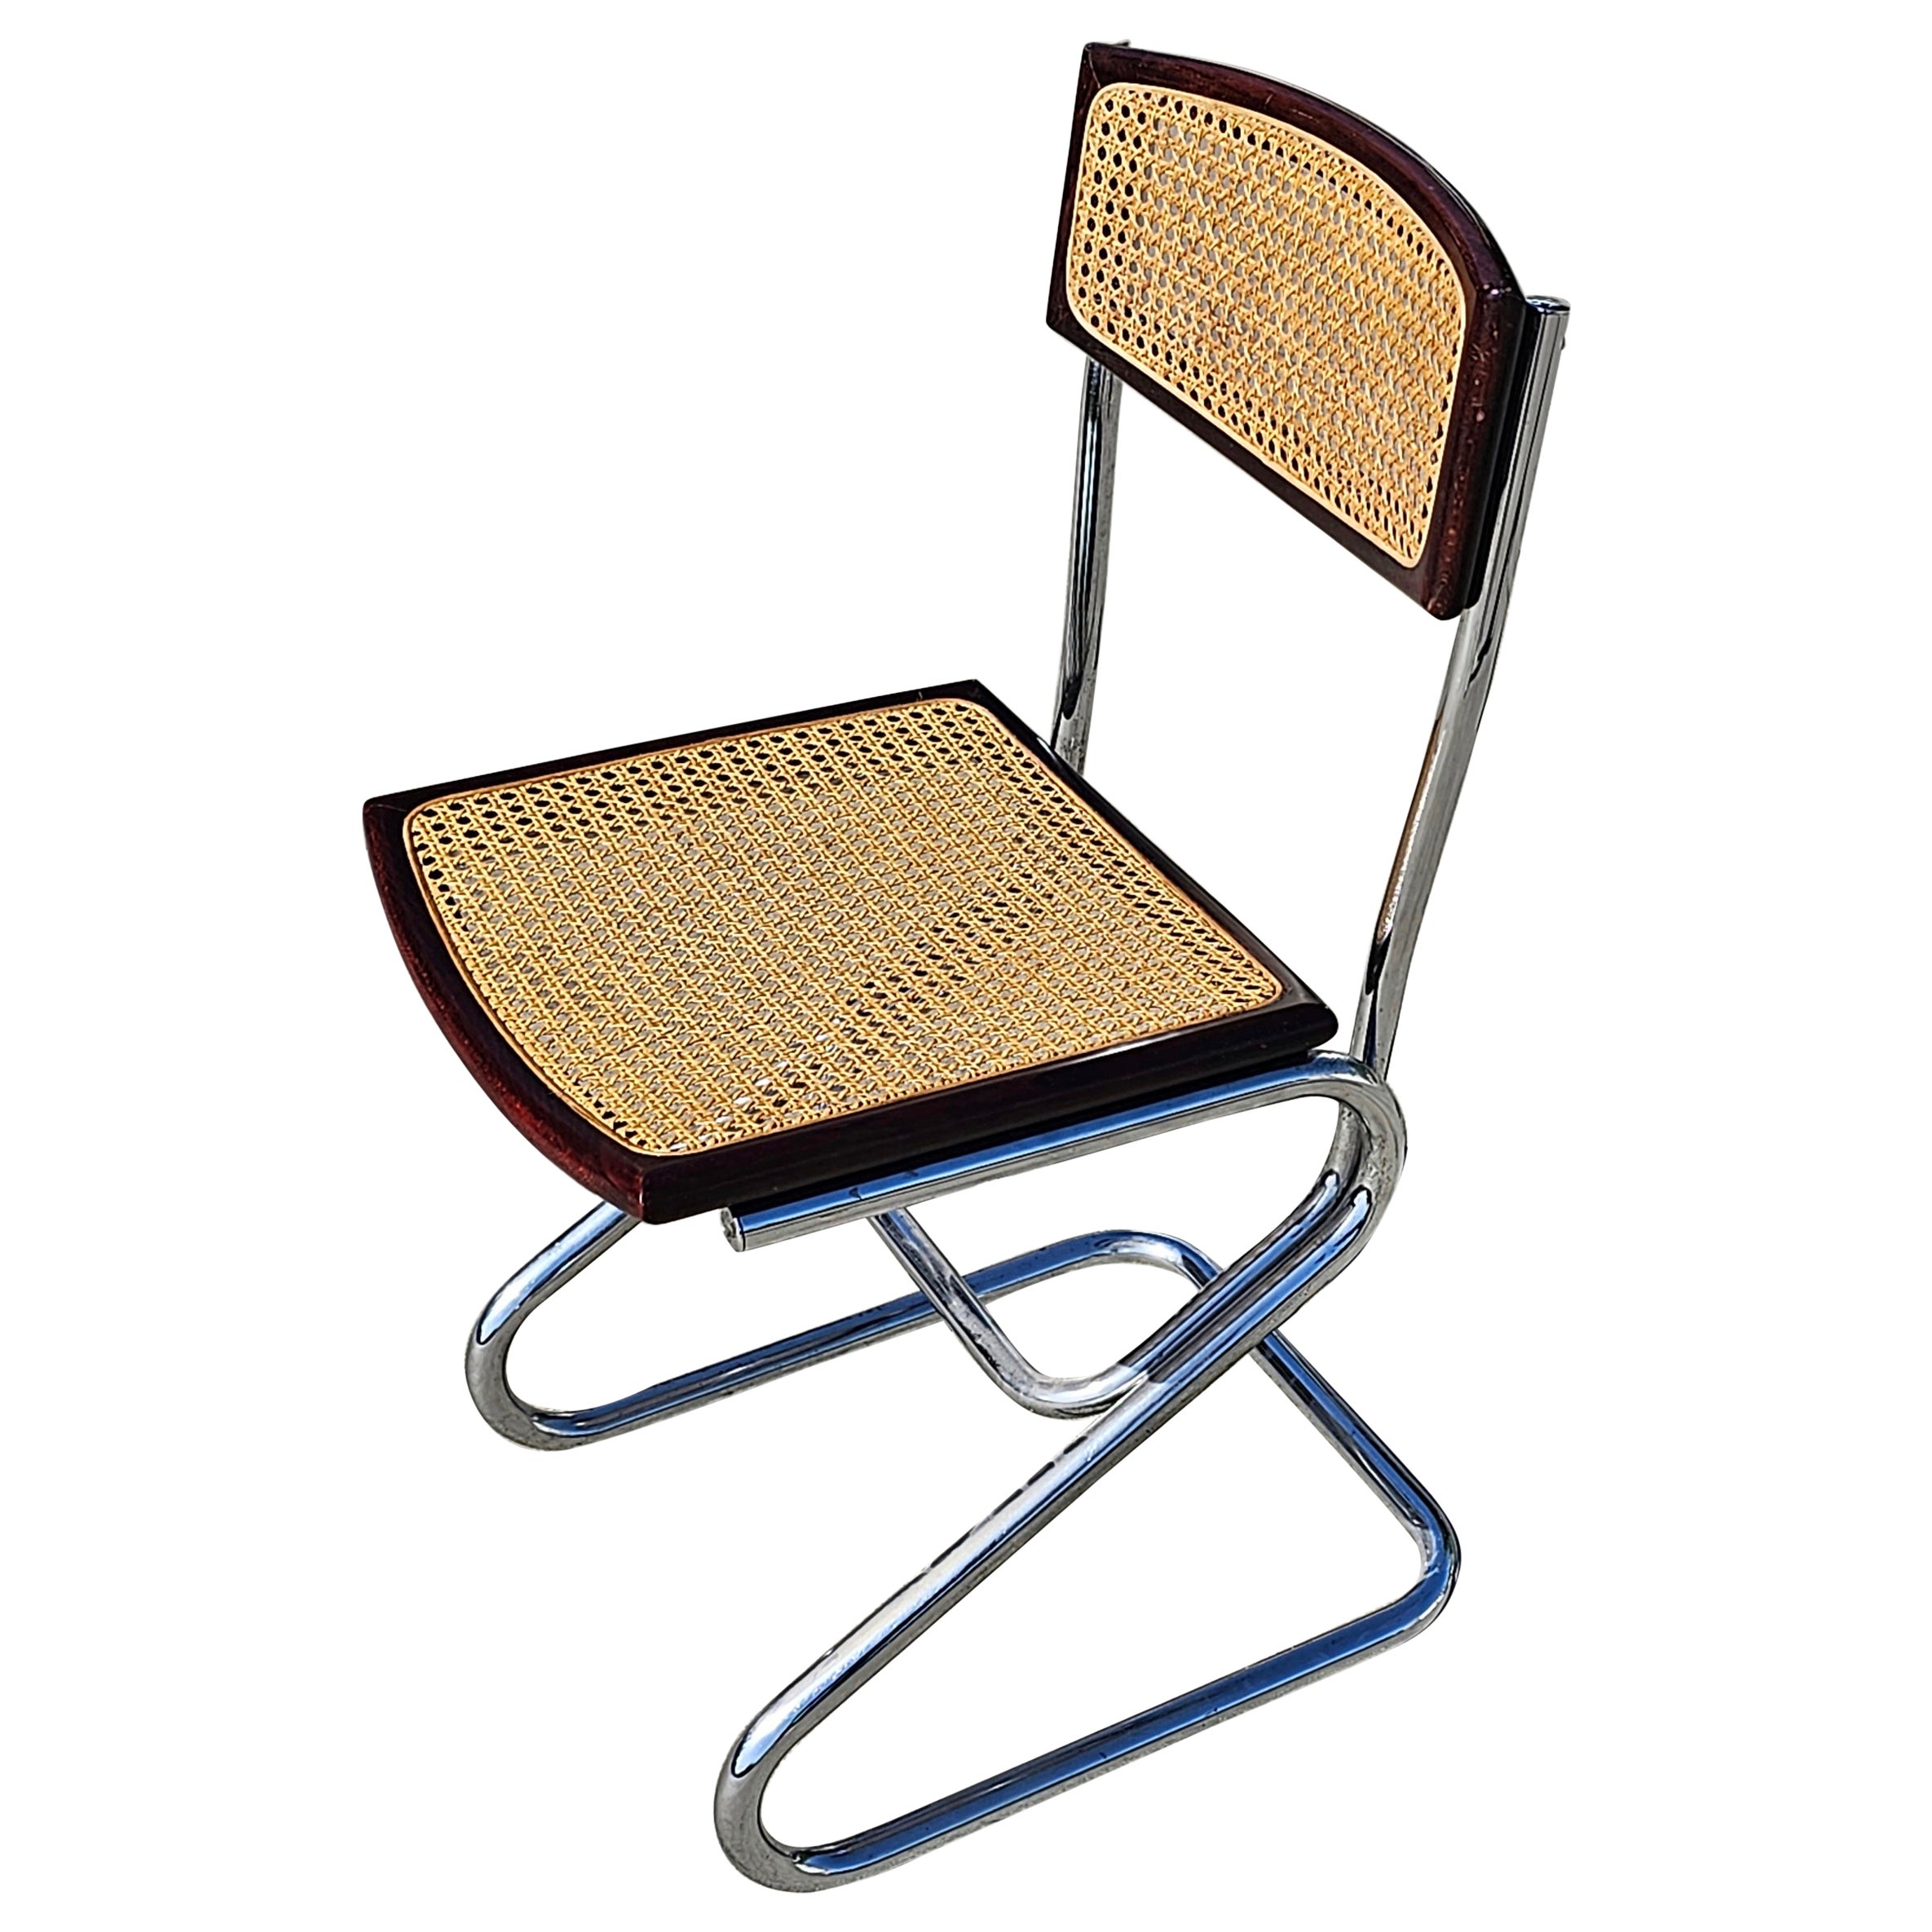 1 of 2 Bauhaus Style Tubular Dining Chairs with Cane Seats, Italy 1970s